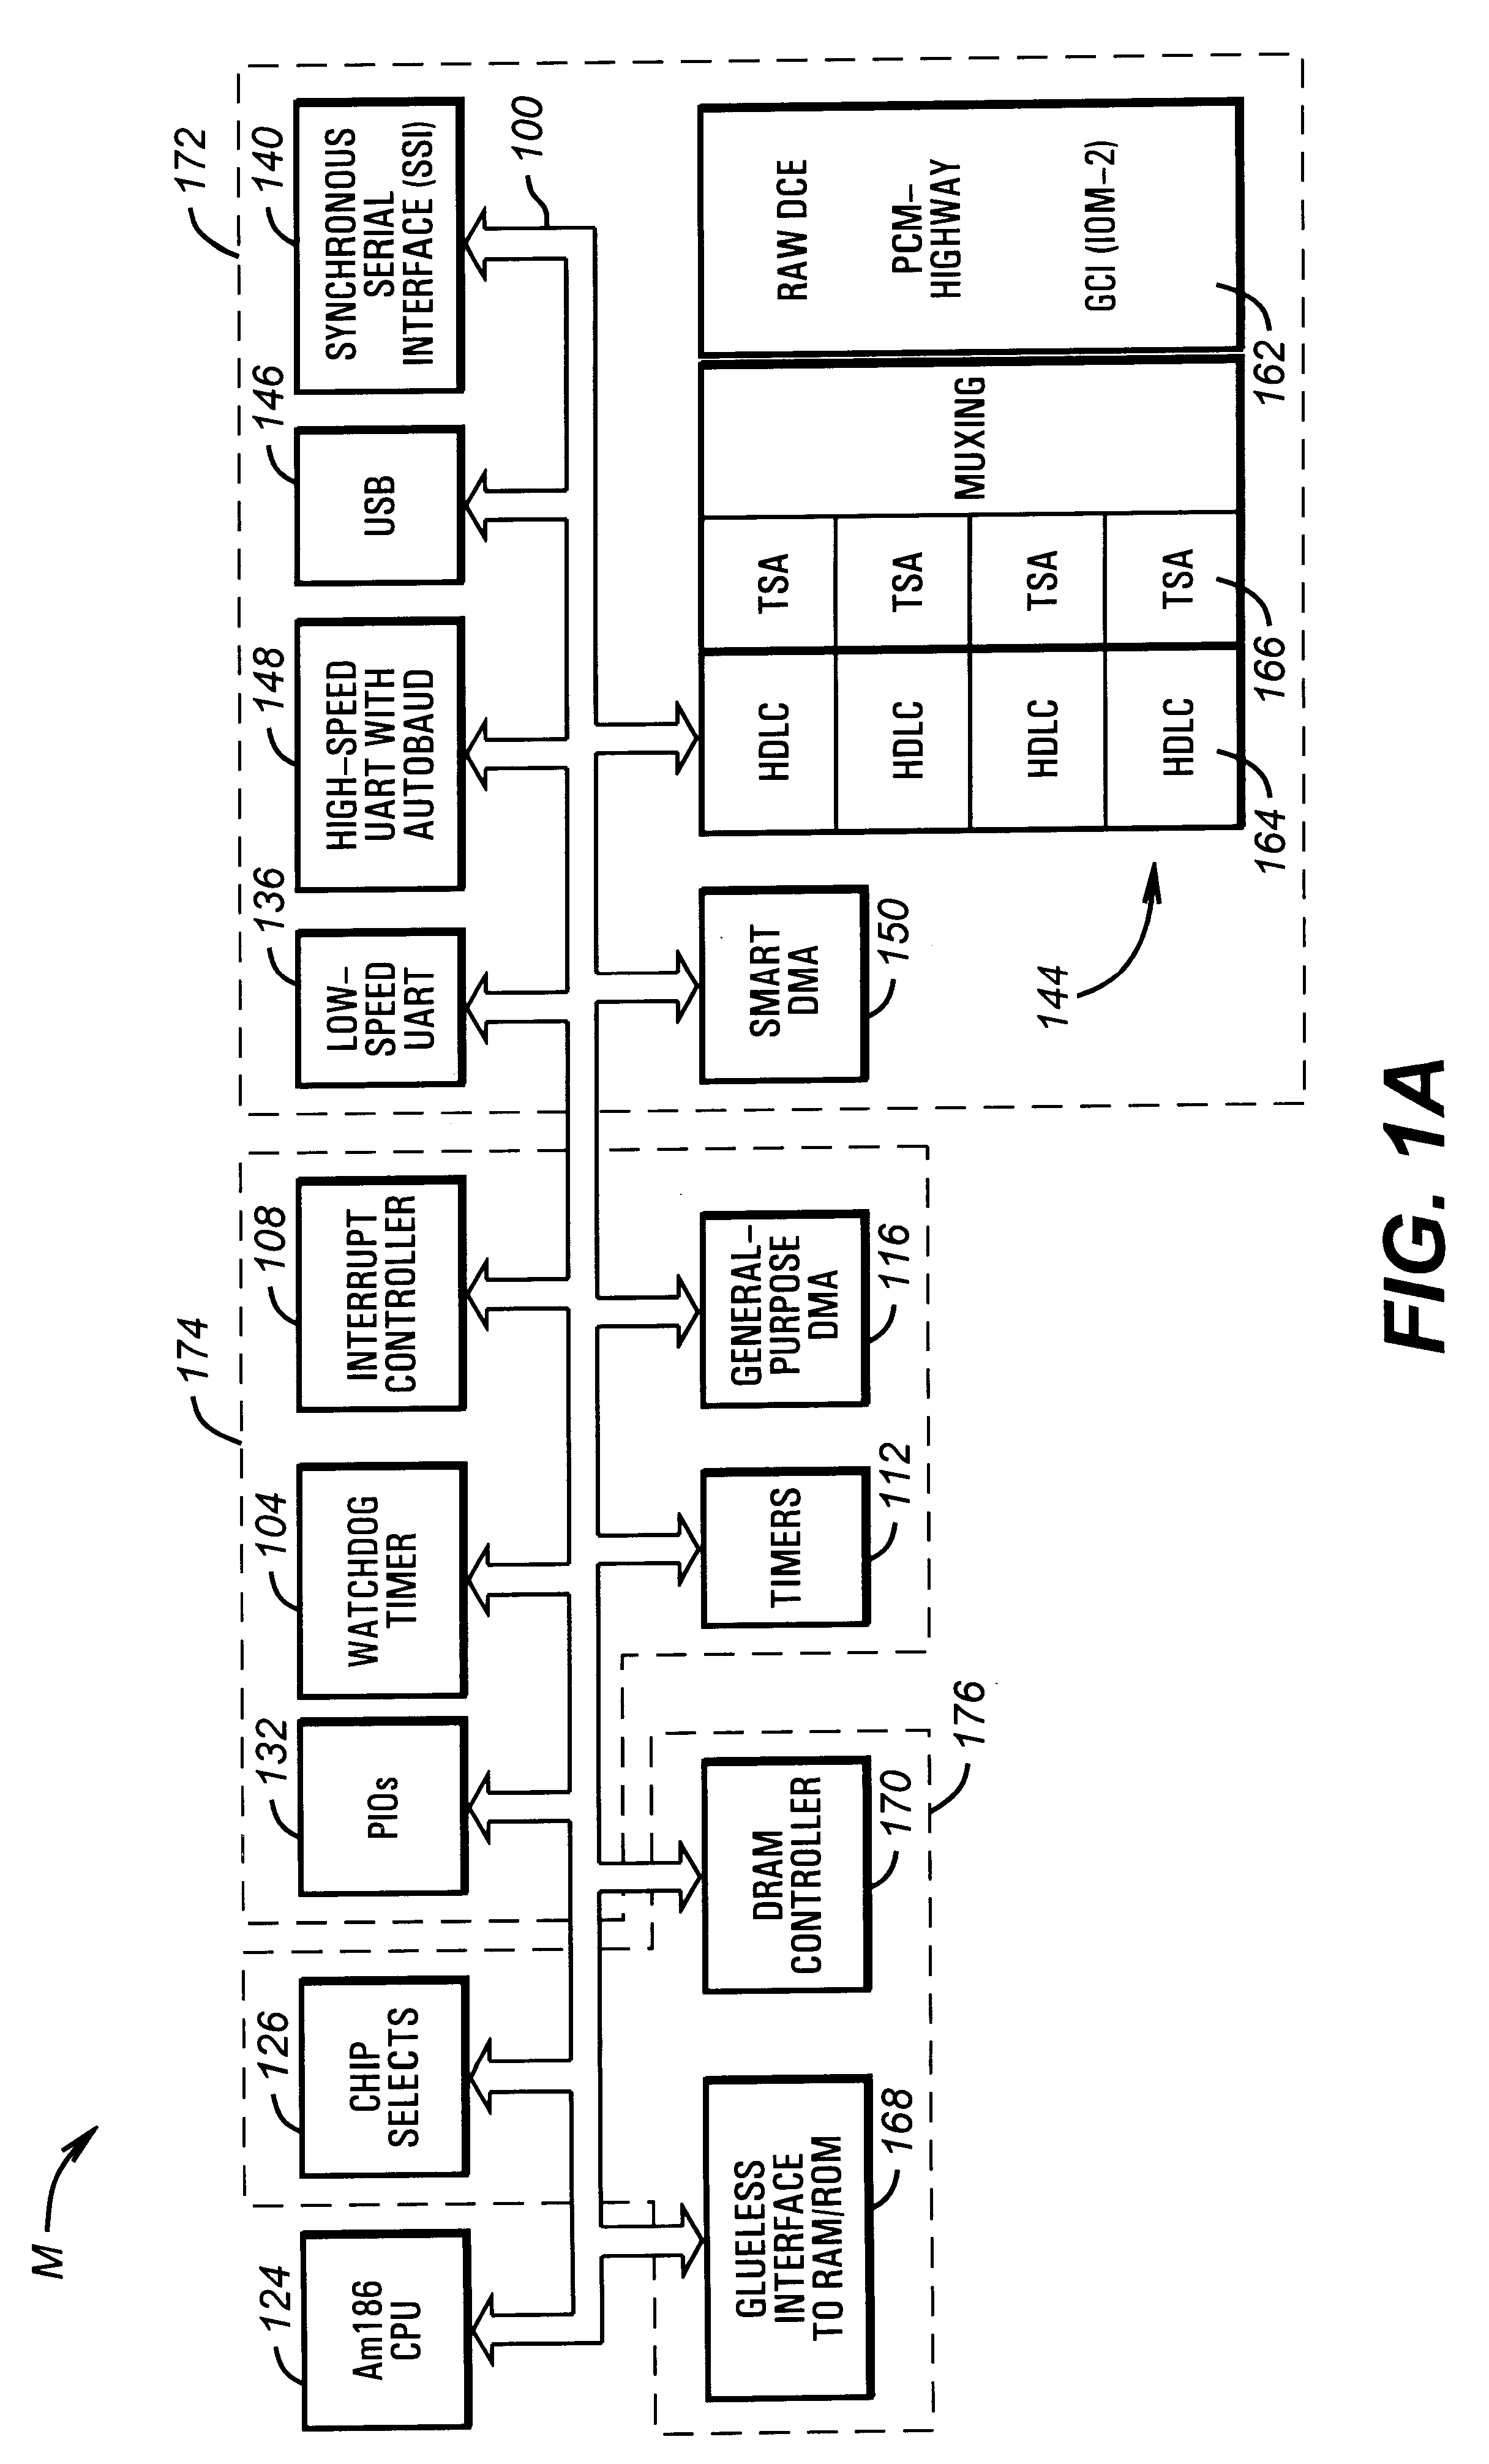 Staggered polling of buffer descriptors in a buffer descriptor ring direct memory access system